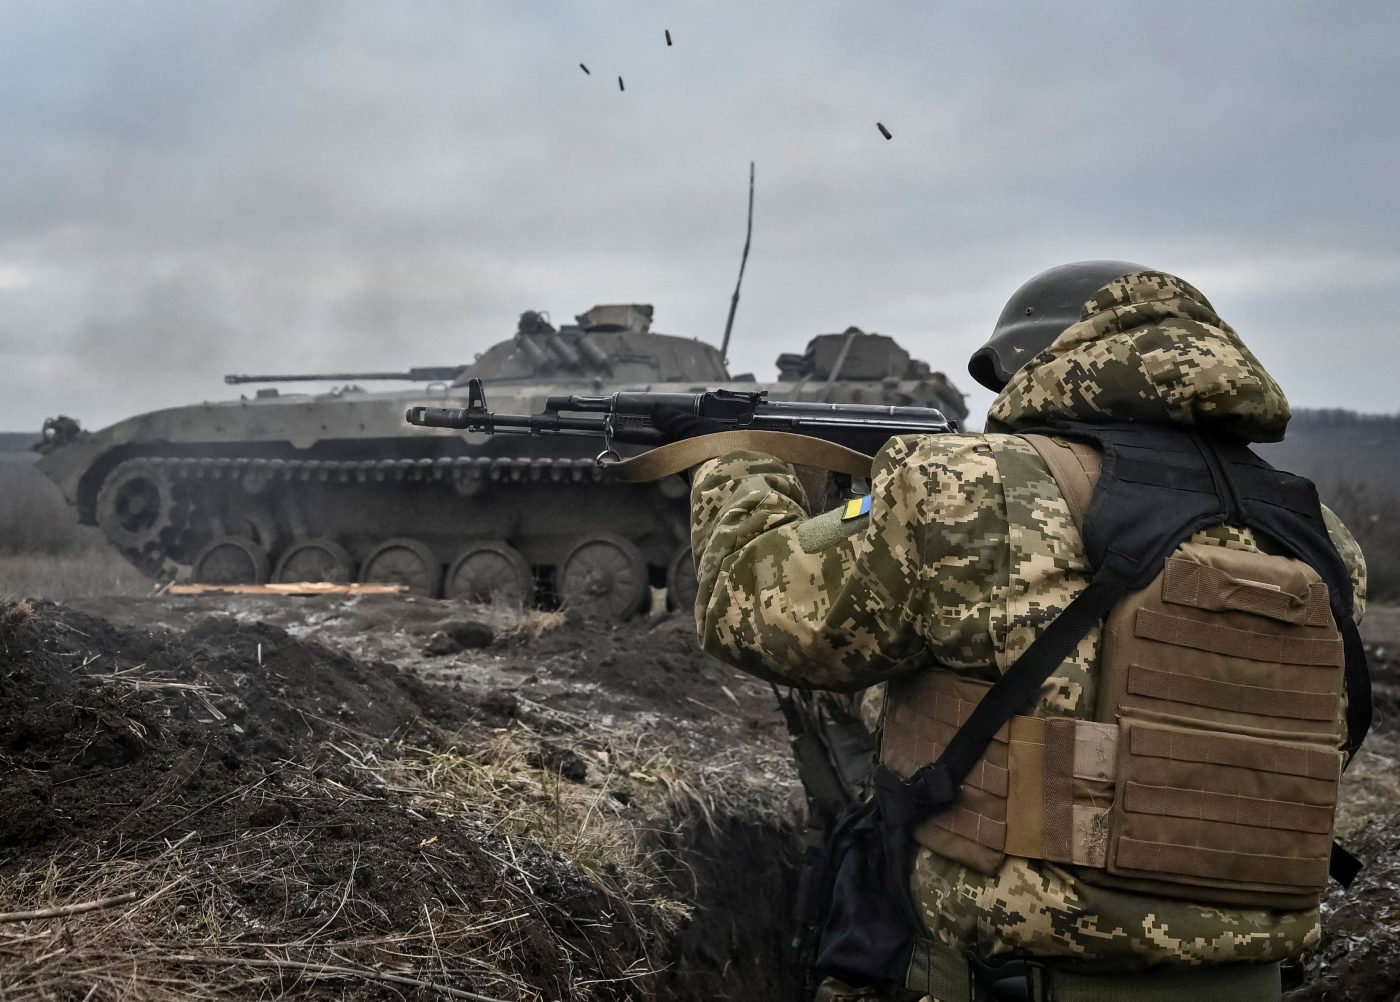 Photo: A Ukrainian service member fires an AK-74 assault rifle during offensive and assault drills, amid Russia's attack on Ukraine, in Zaporizhzhia Region, Ukraine January 23, 2023. Credit: REUTERS/Stringer